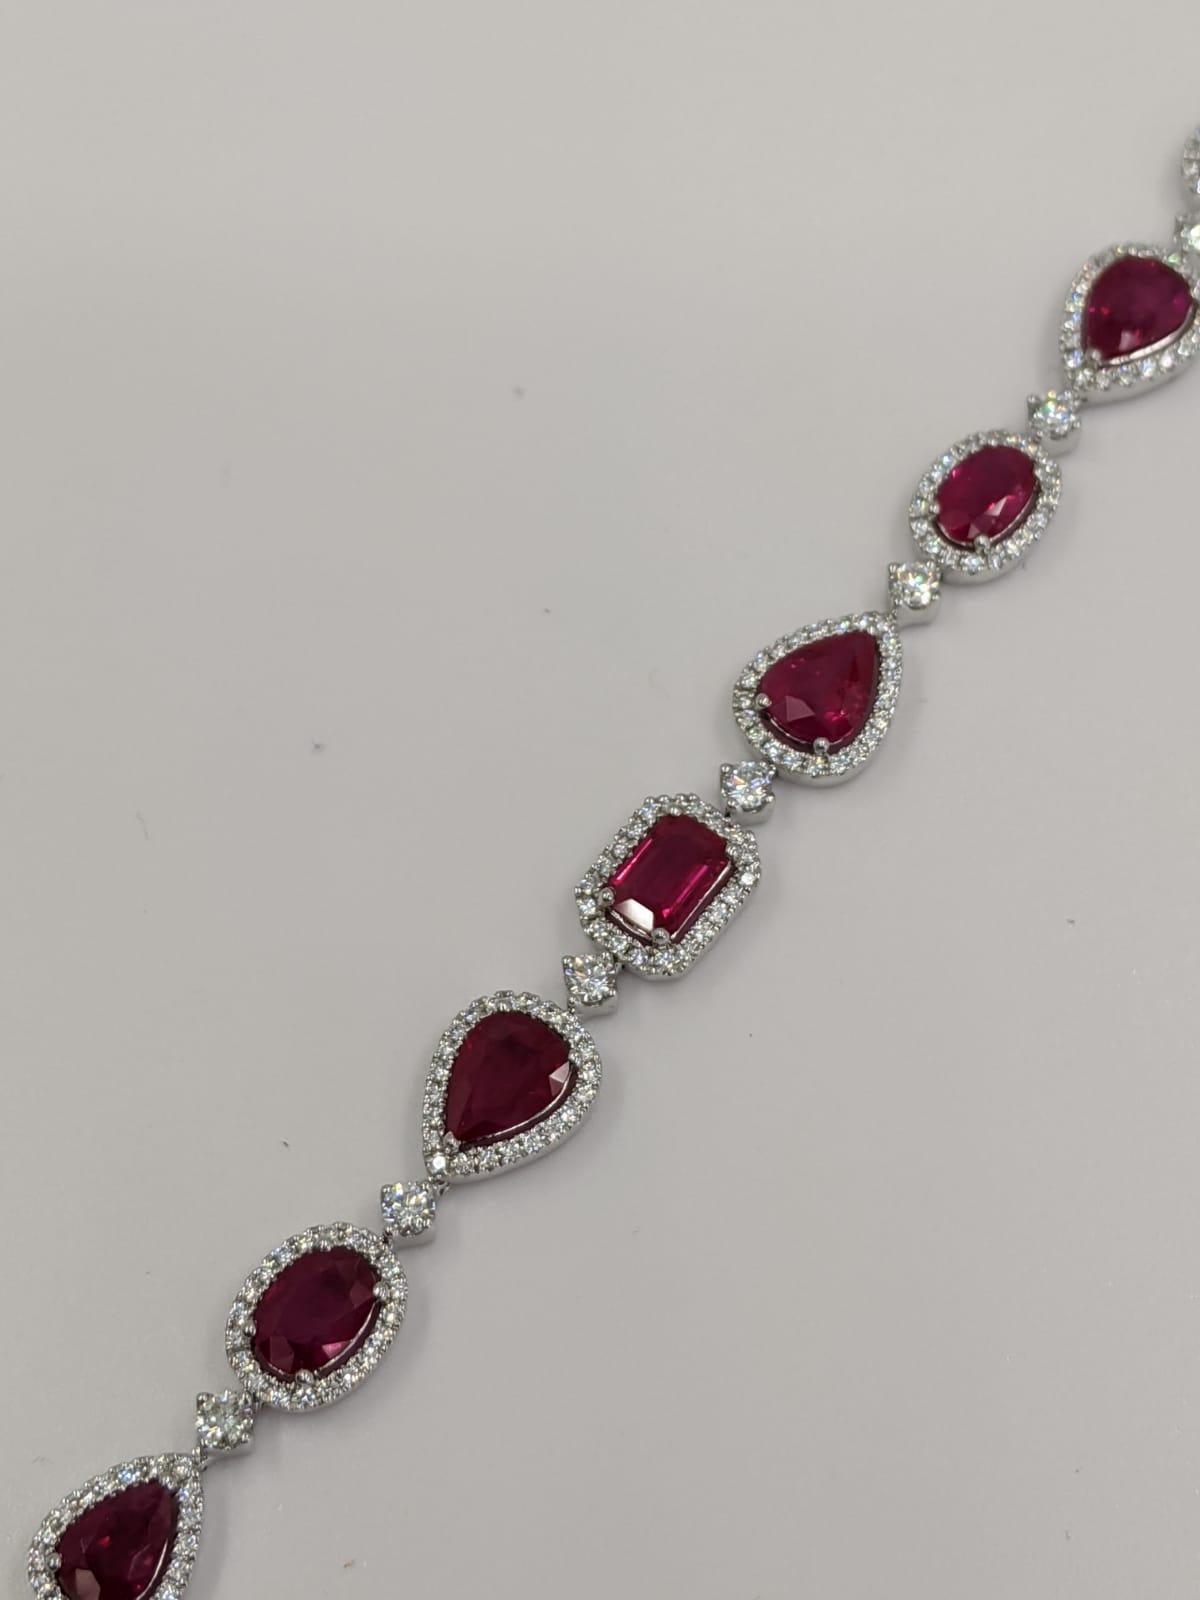 18 Karat White Gold Ruby and Diamond Bracelet
2.61 Carats of Diamonds
11.73 Carats of Rubies
Assortment of shapes and cuts: pear, round, oval, heart
18 Karat White Gold
